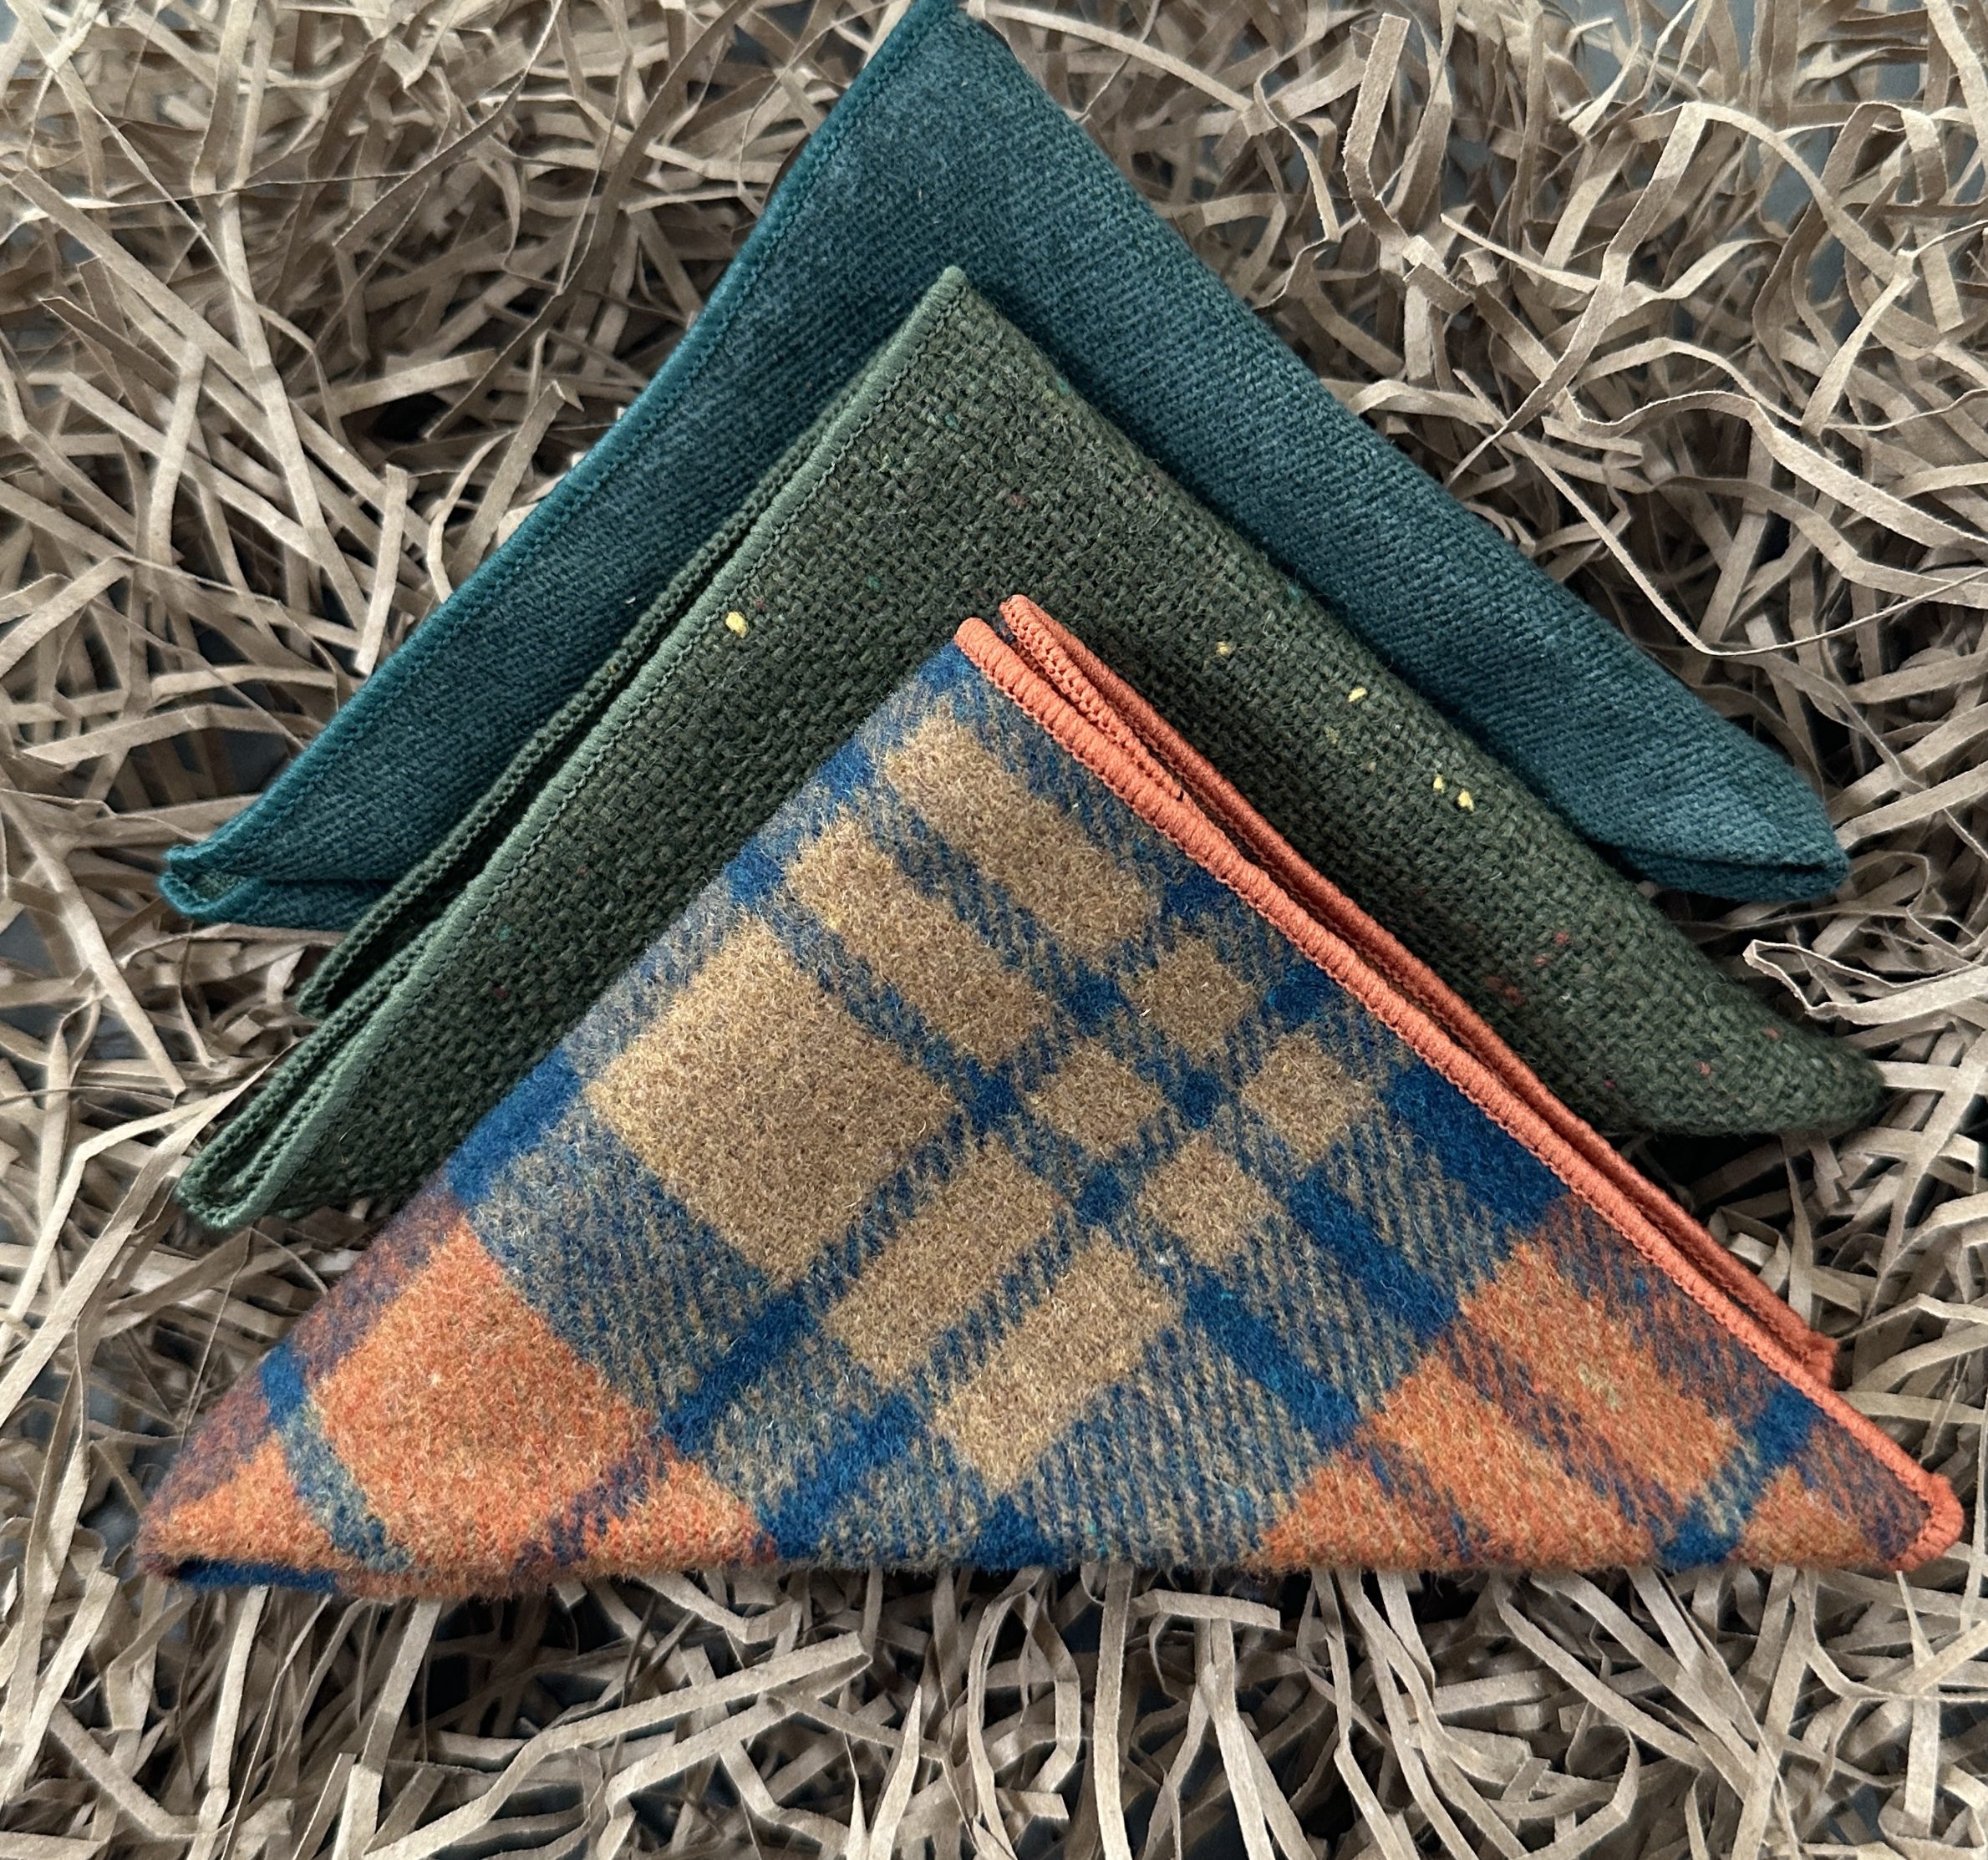 A set of three wool men's pocket handkerchiefs in wool and an orange check. THe set is ideal for men's gifts UK, mens's gifts USA and men's wedding attire.